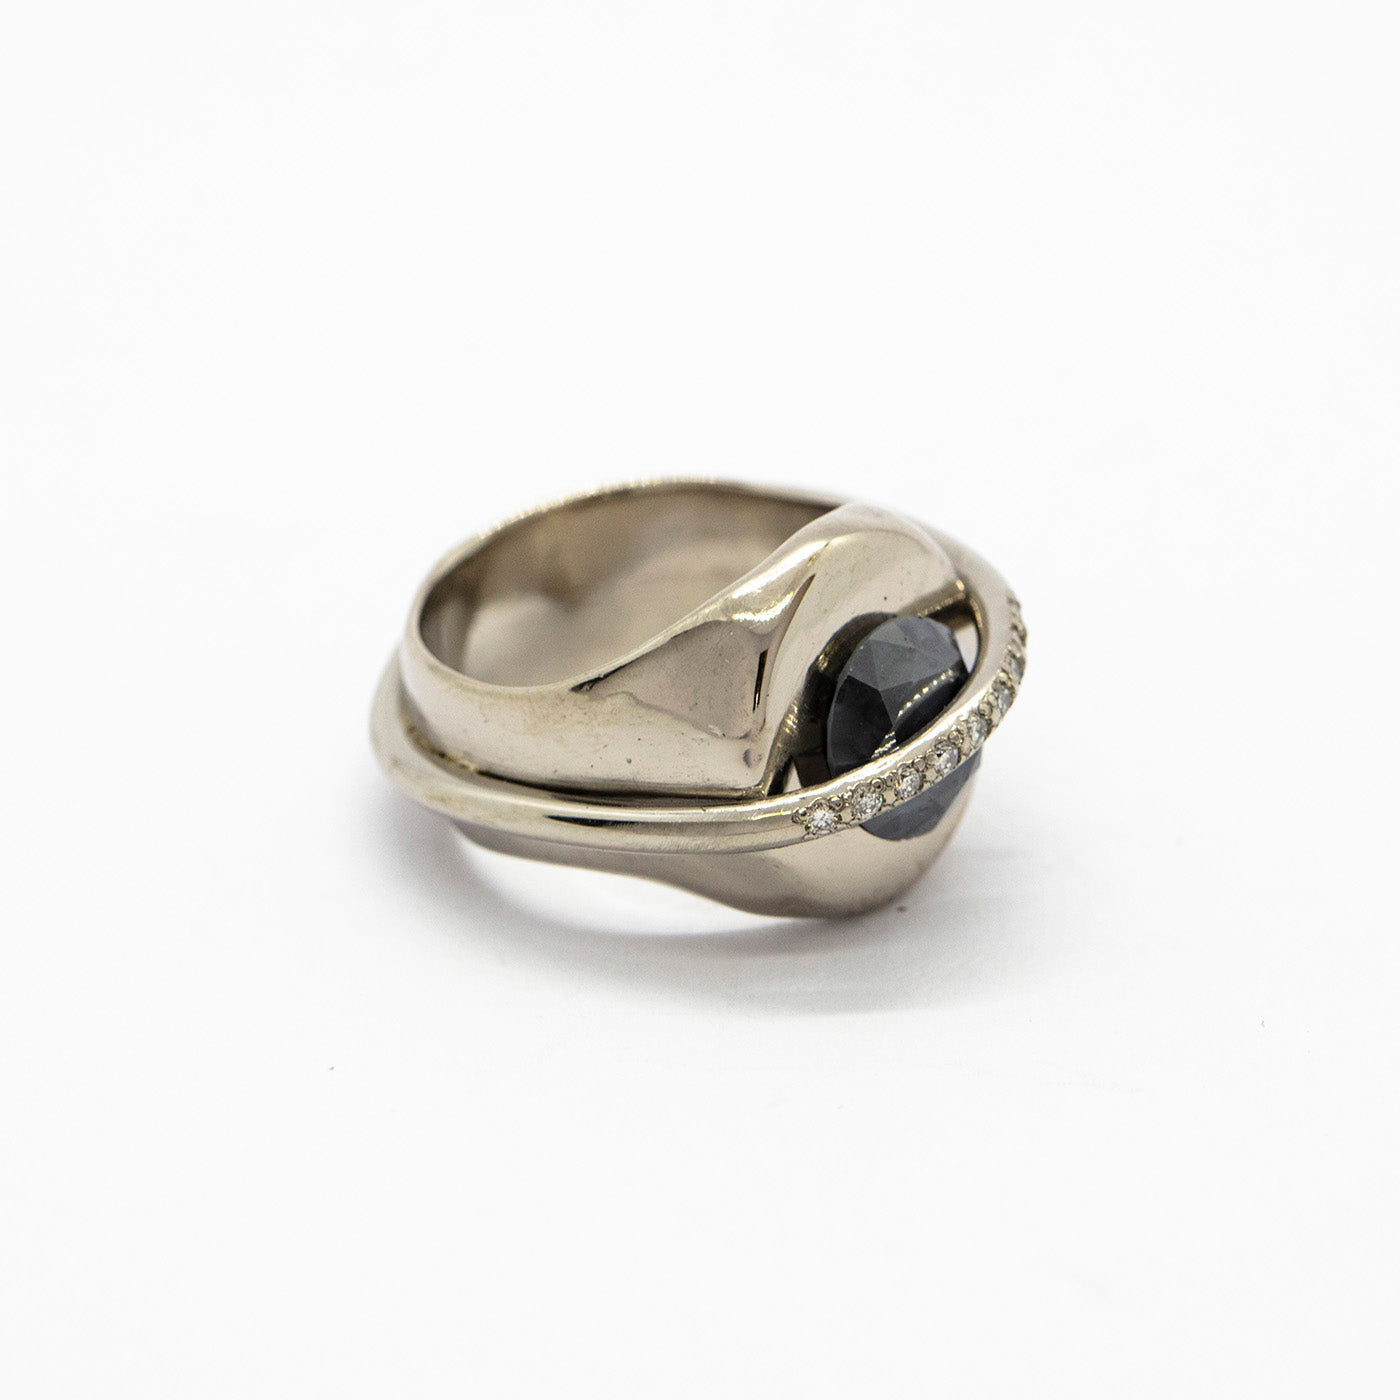 Chaotic Signet ring front view 18ct white gold 2,52ct dark indigo diamond and small champagne diamonds innan jewellery independent atelier berlin